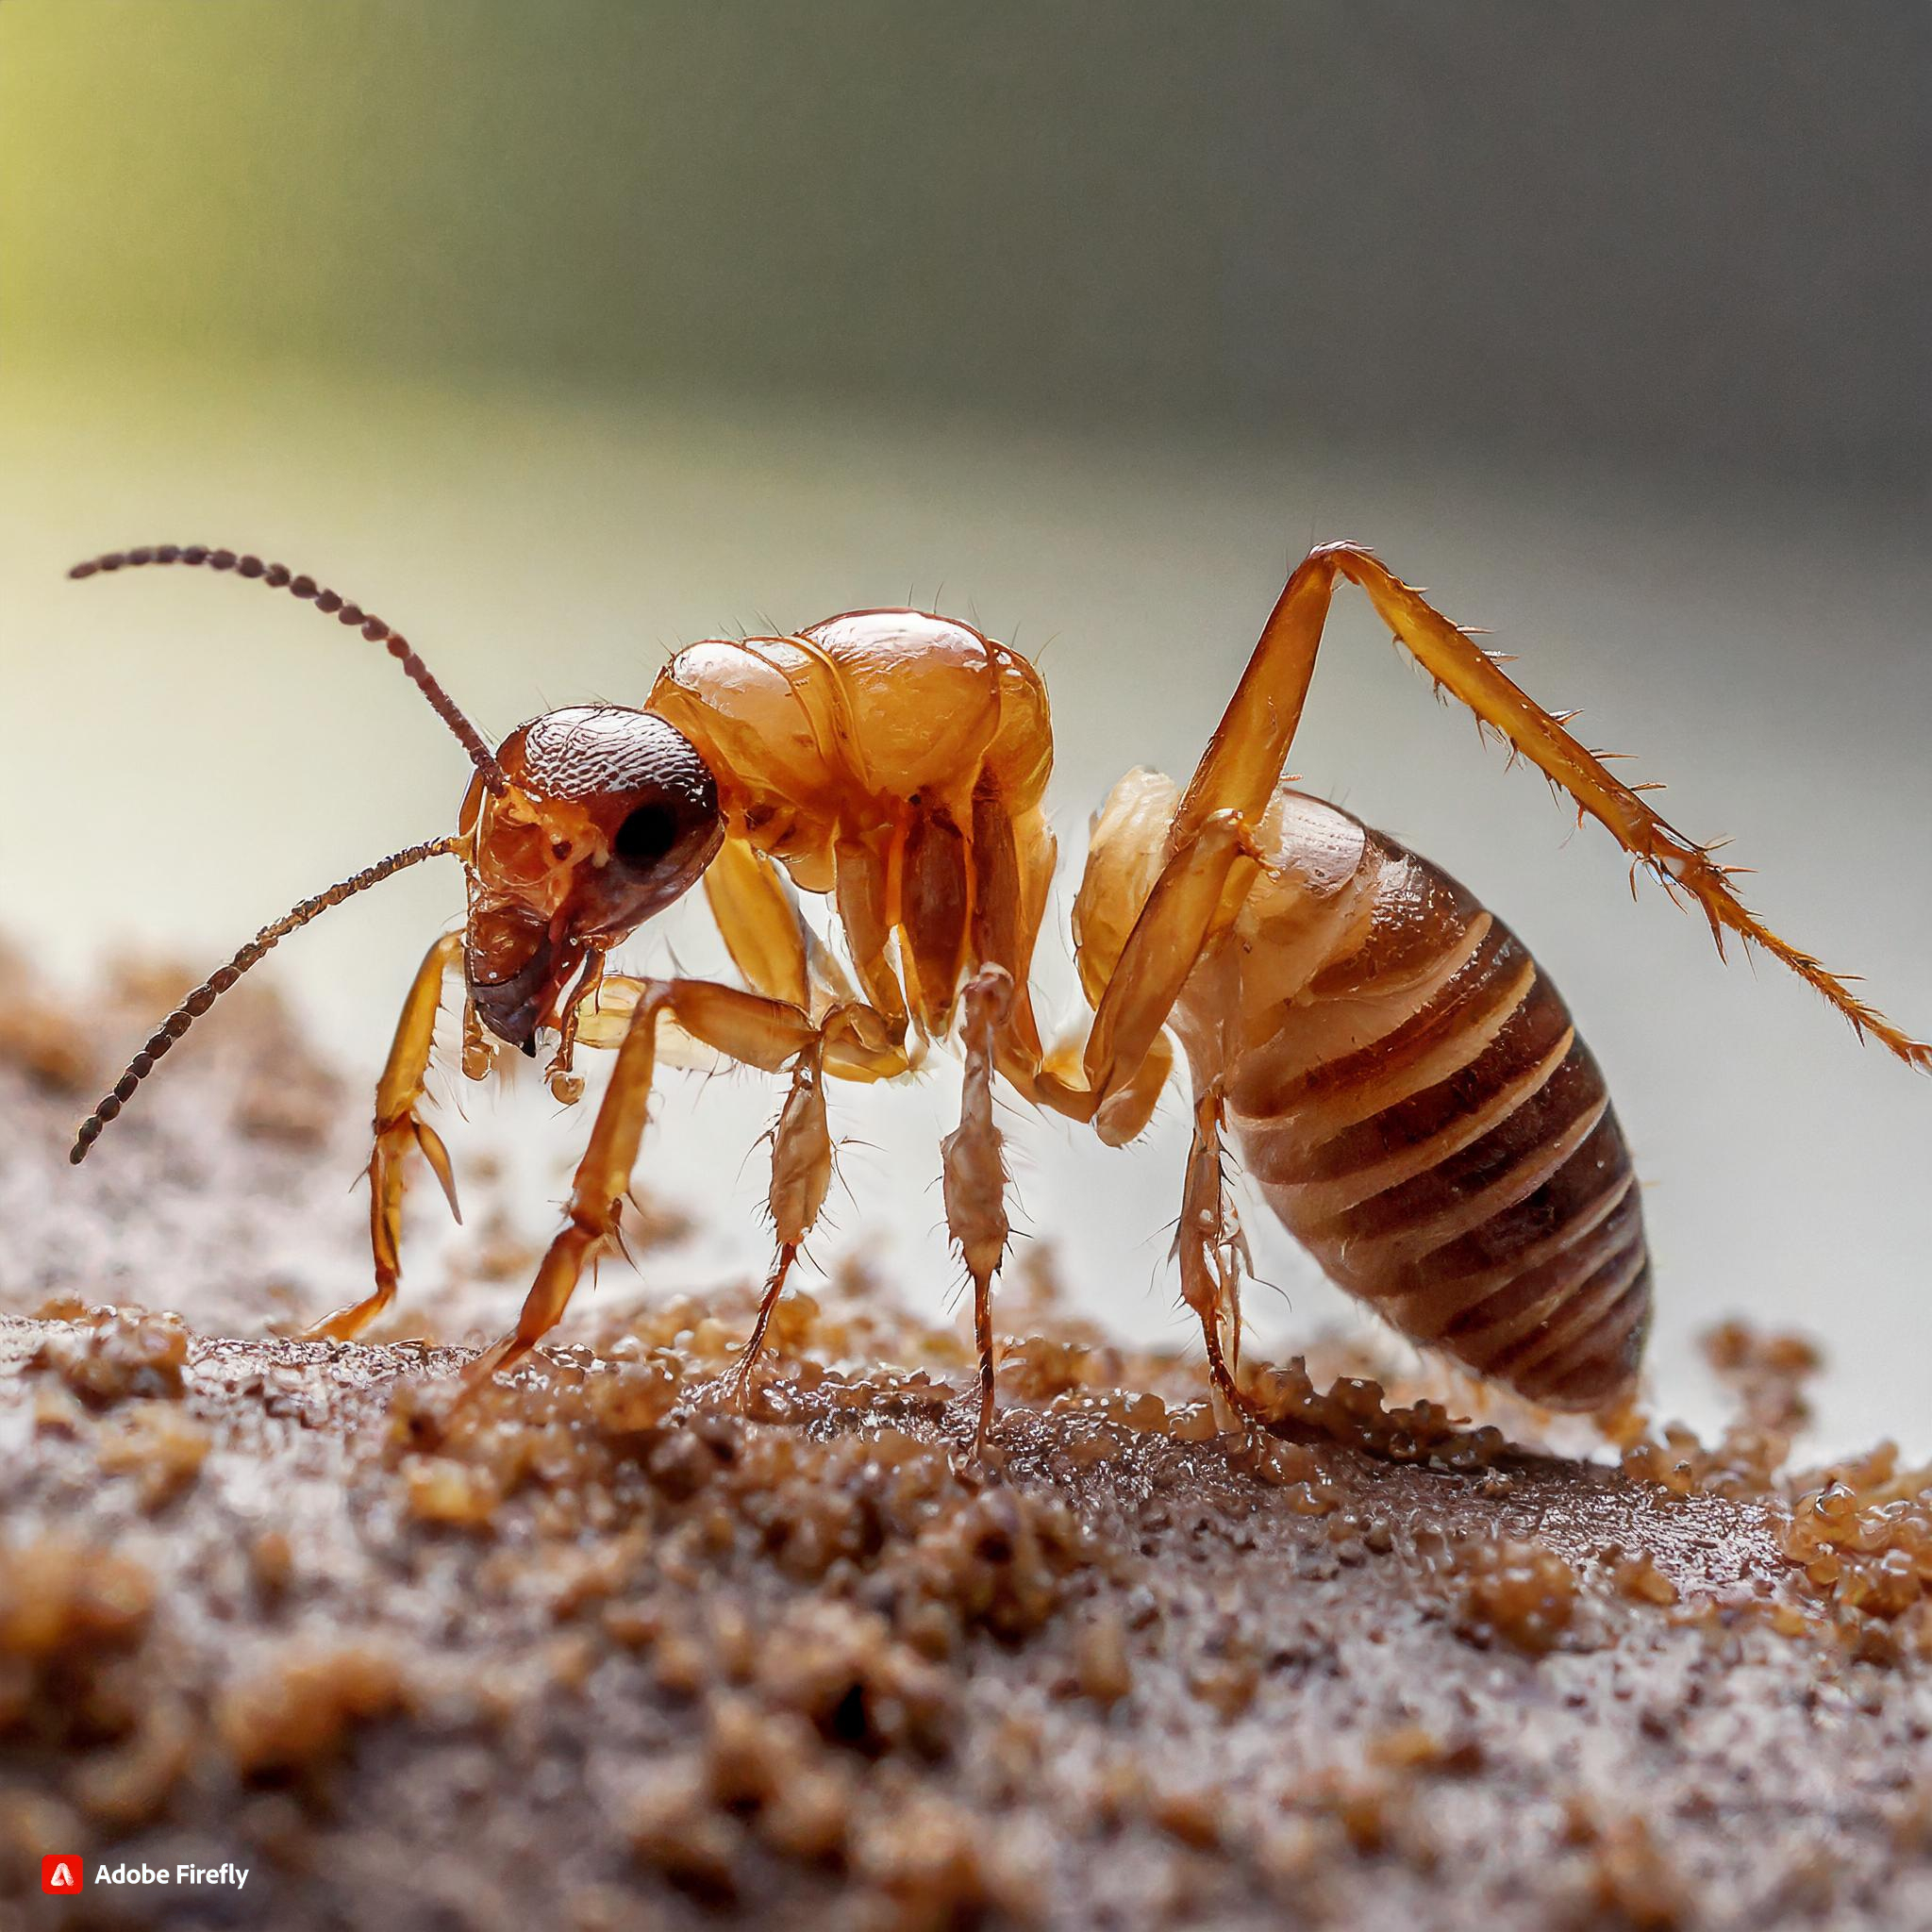 What Does a Subterranean Termite Look Like